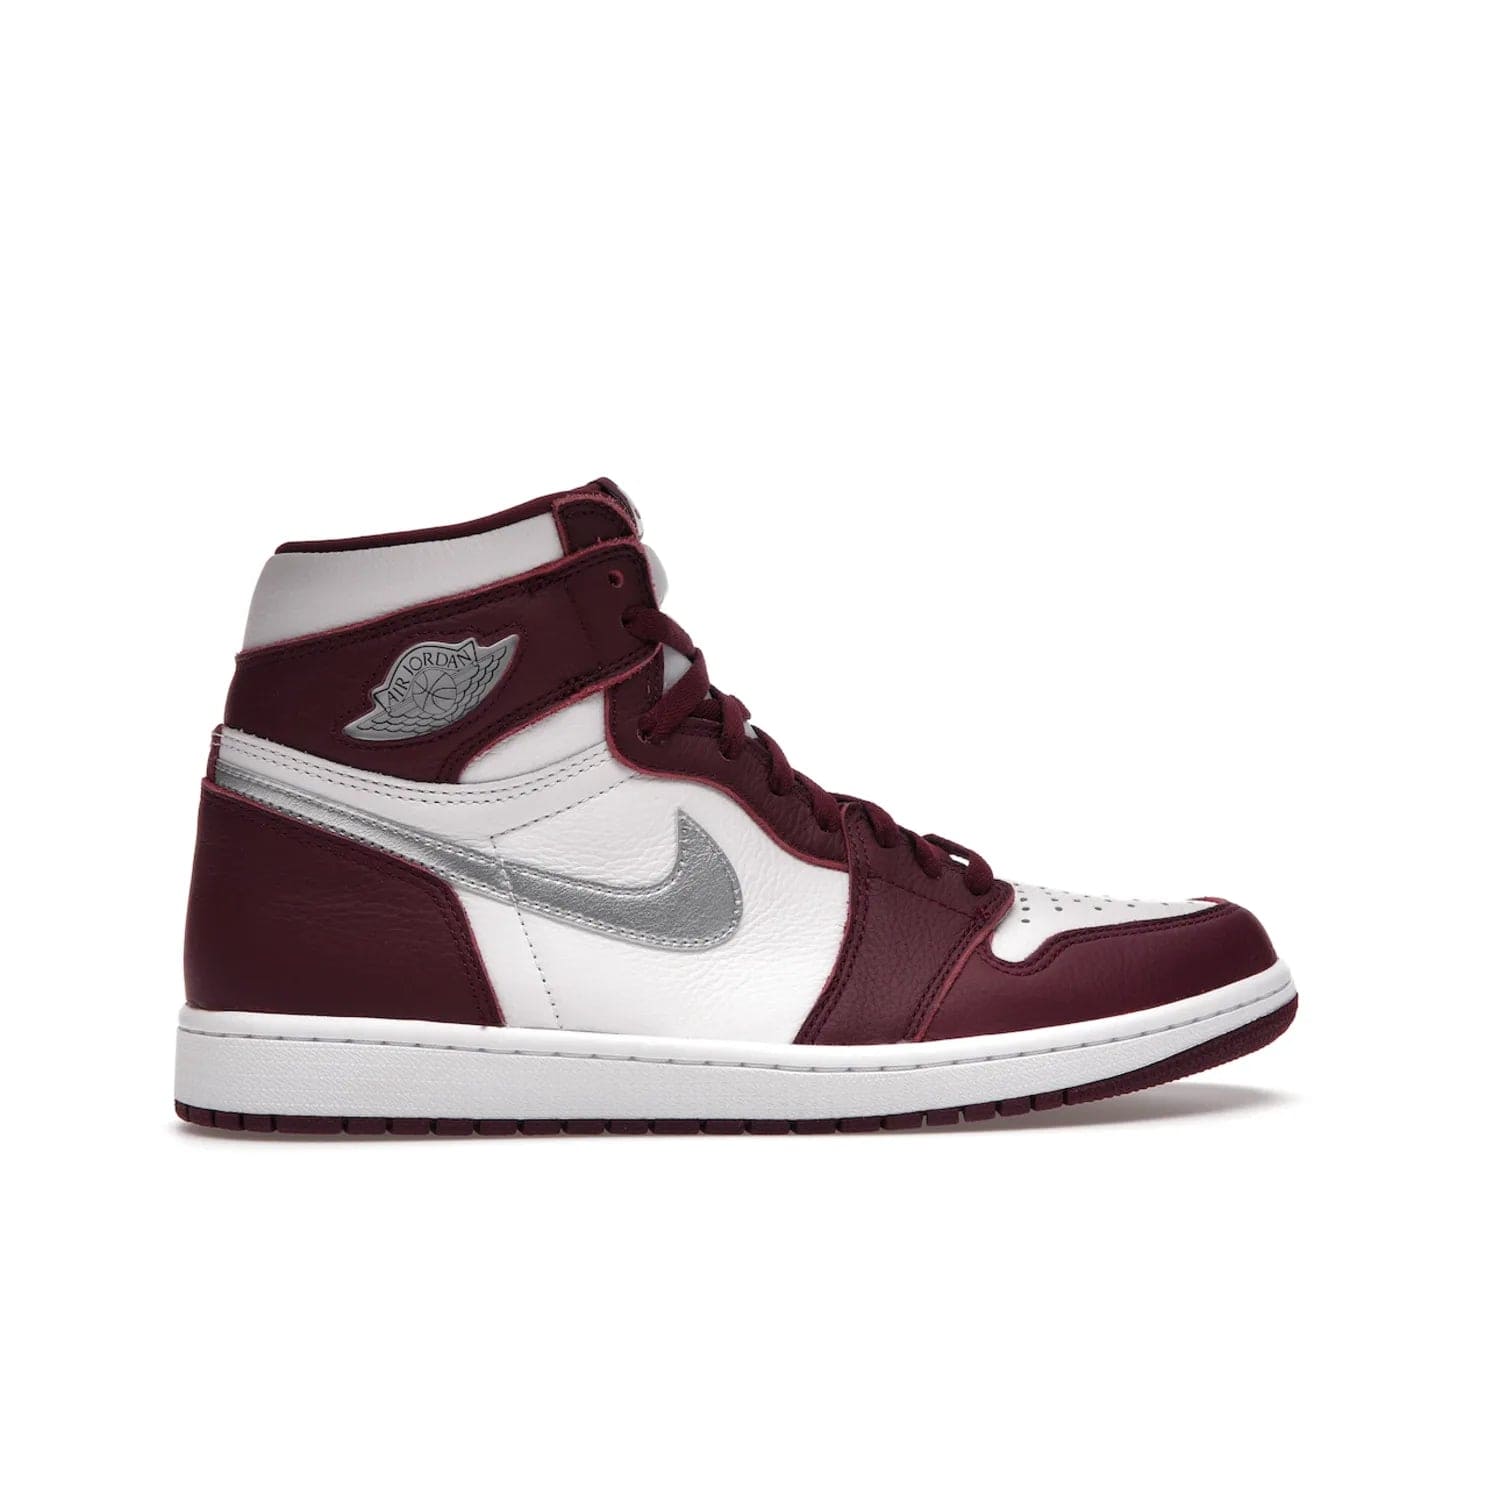 Jordan 1 Retro High OG Bordeaux - Image 36 - Only at www.BallersClubKickz.com - Shop the classic Air Jordan 1 High Bordeaux with a modern high-top cut. The timeless Bordeaux and White-Metallic Silver colorway, releasing Nov 20, 2021, is perfect for practice or a night out.